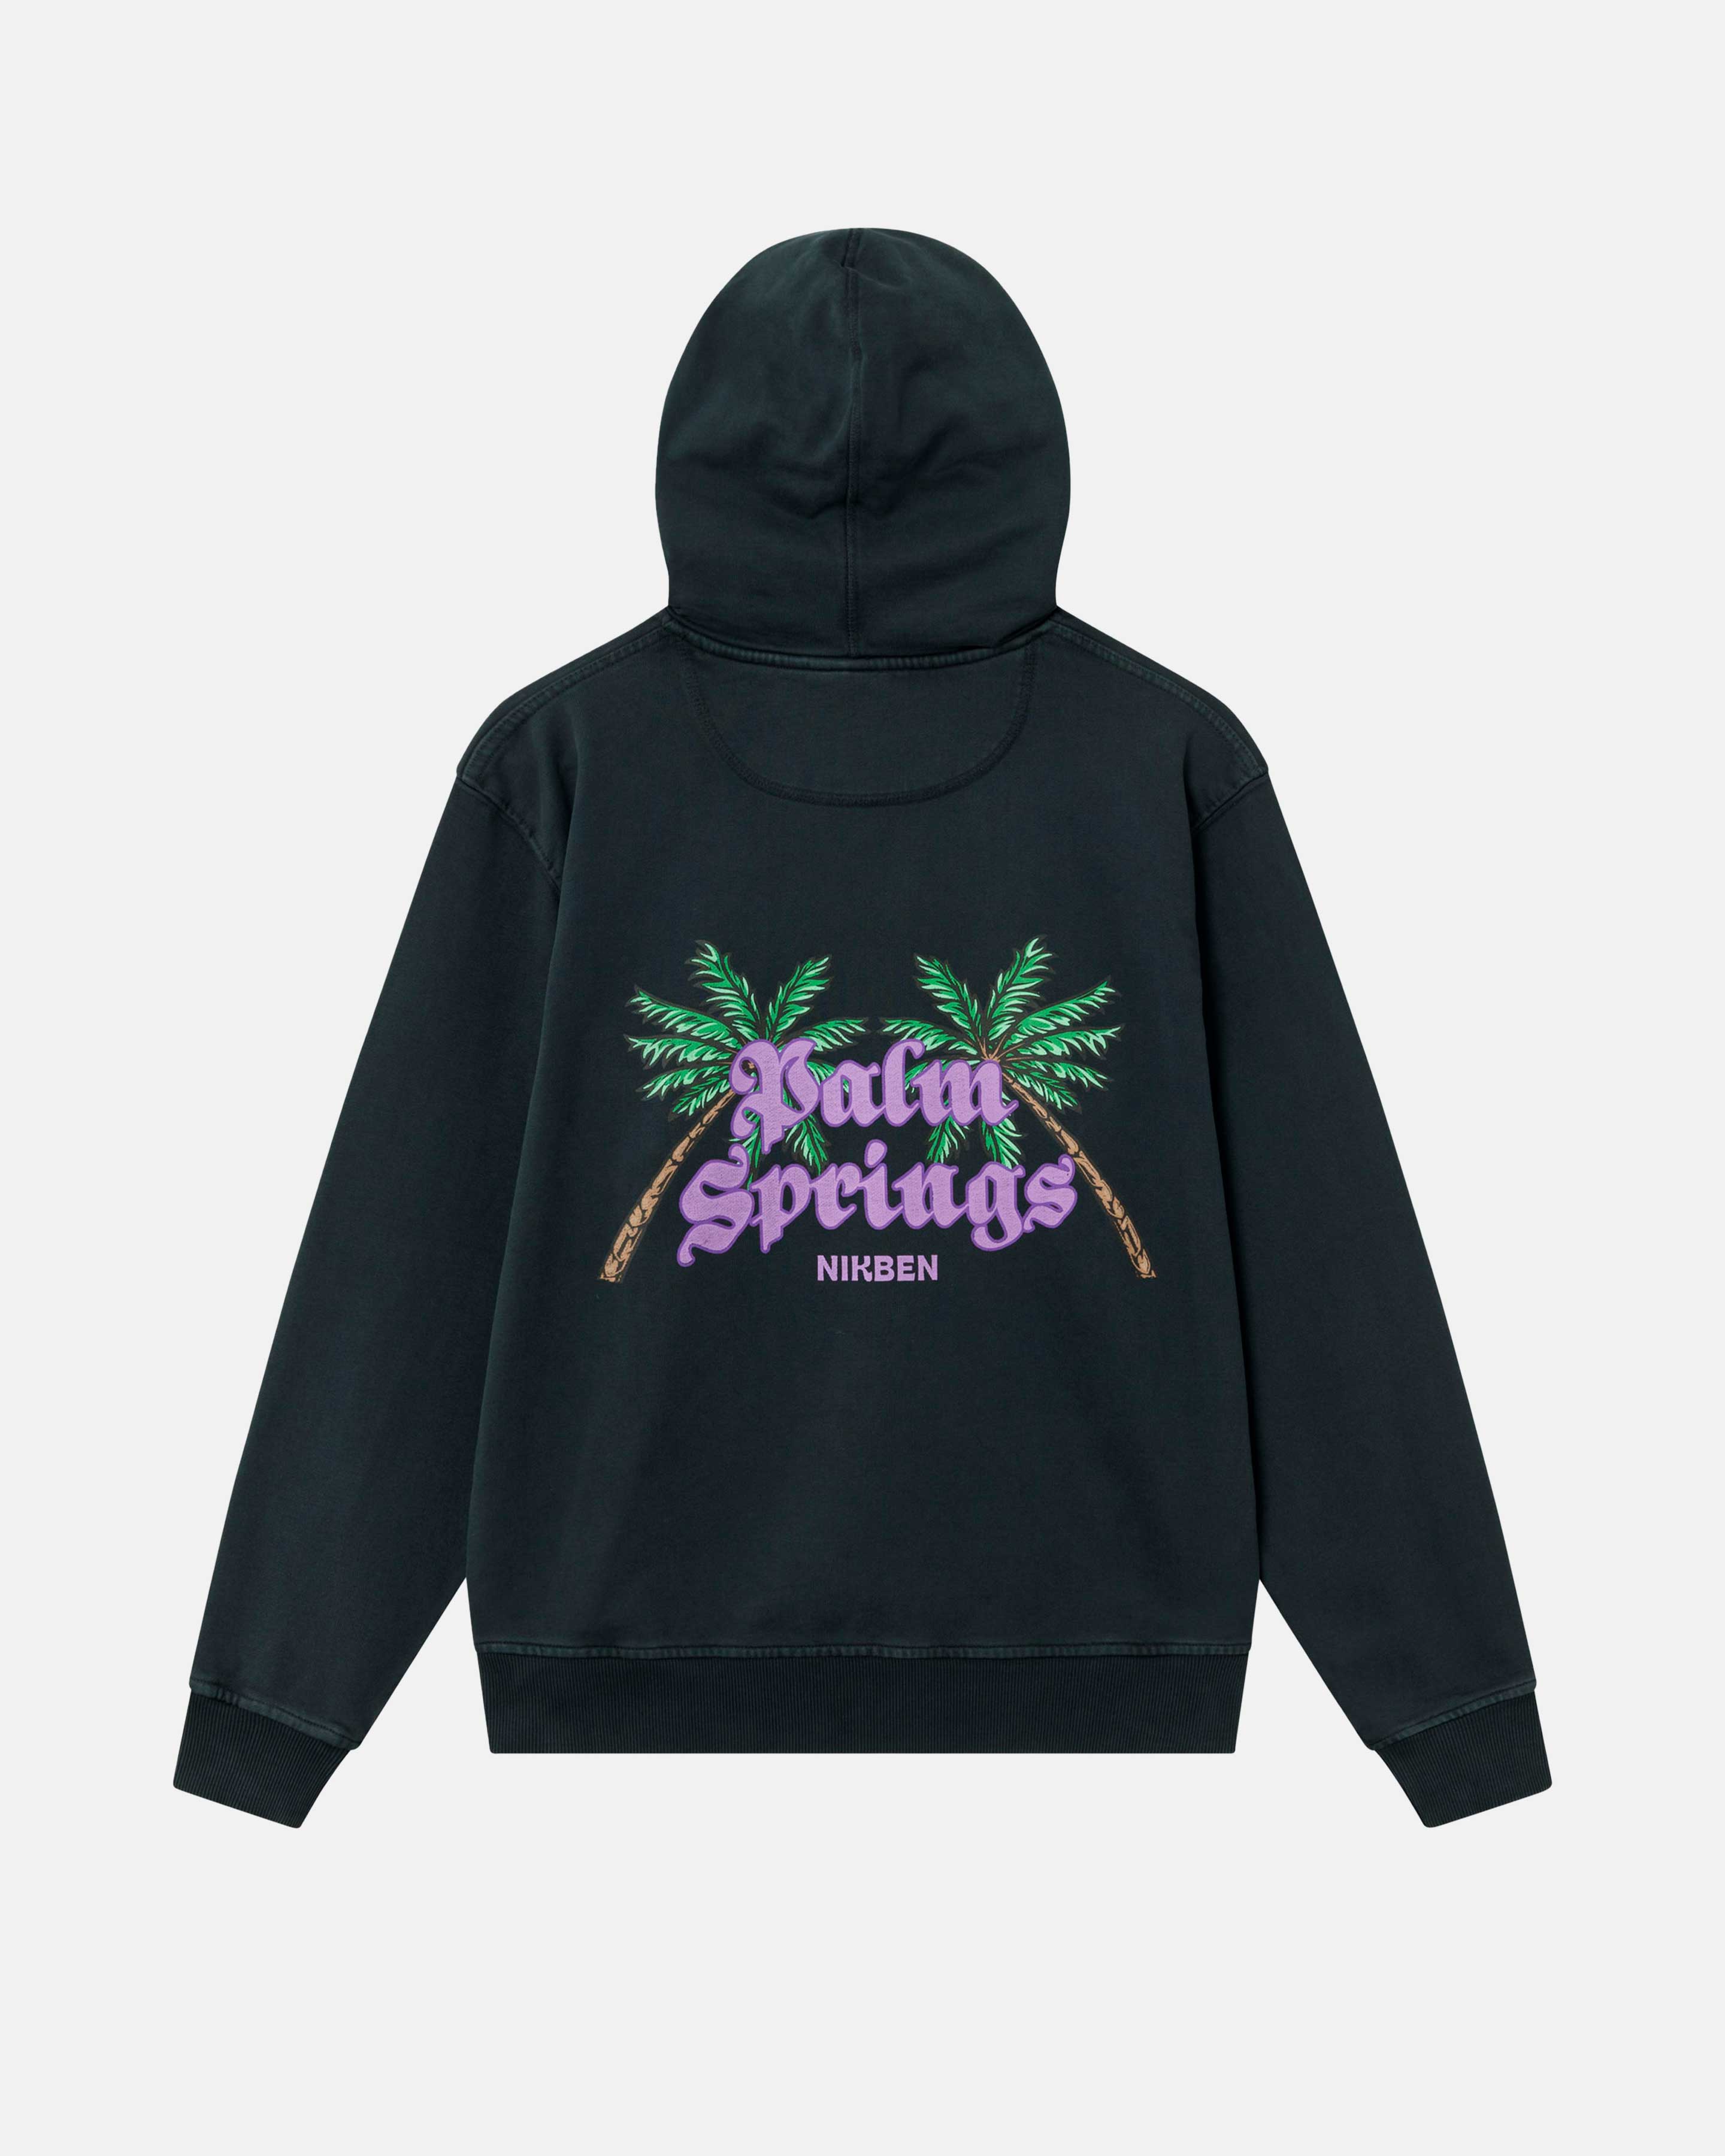 Back view of black unisex hoodie with palms and purple text back print.